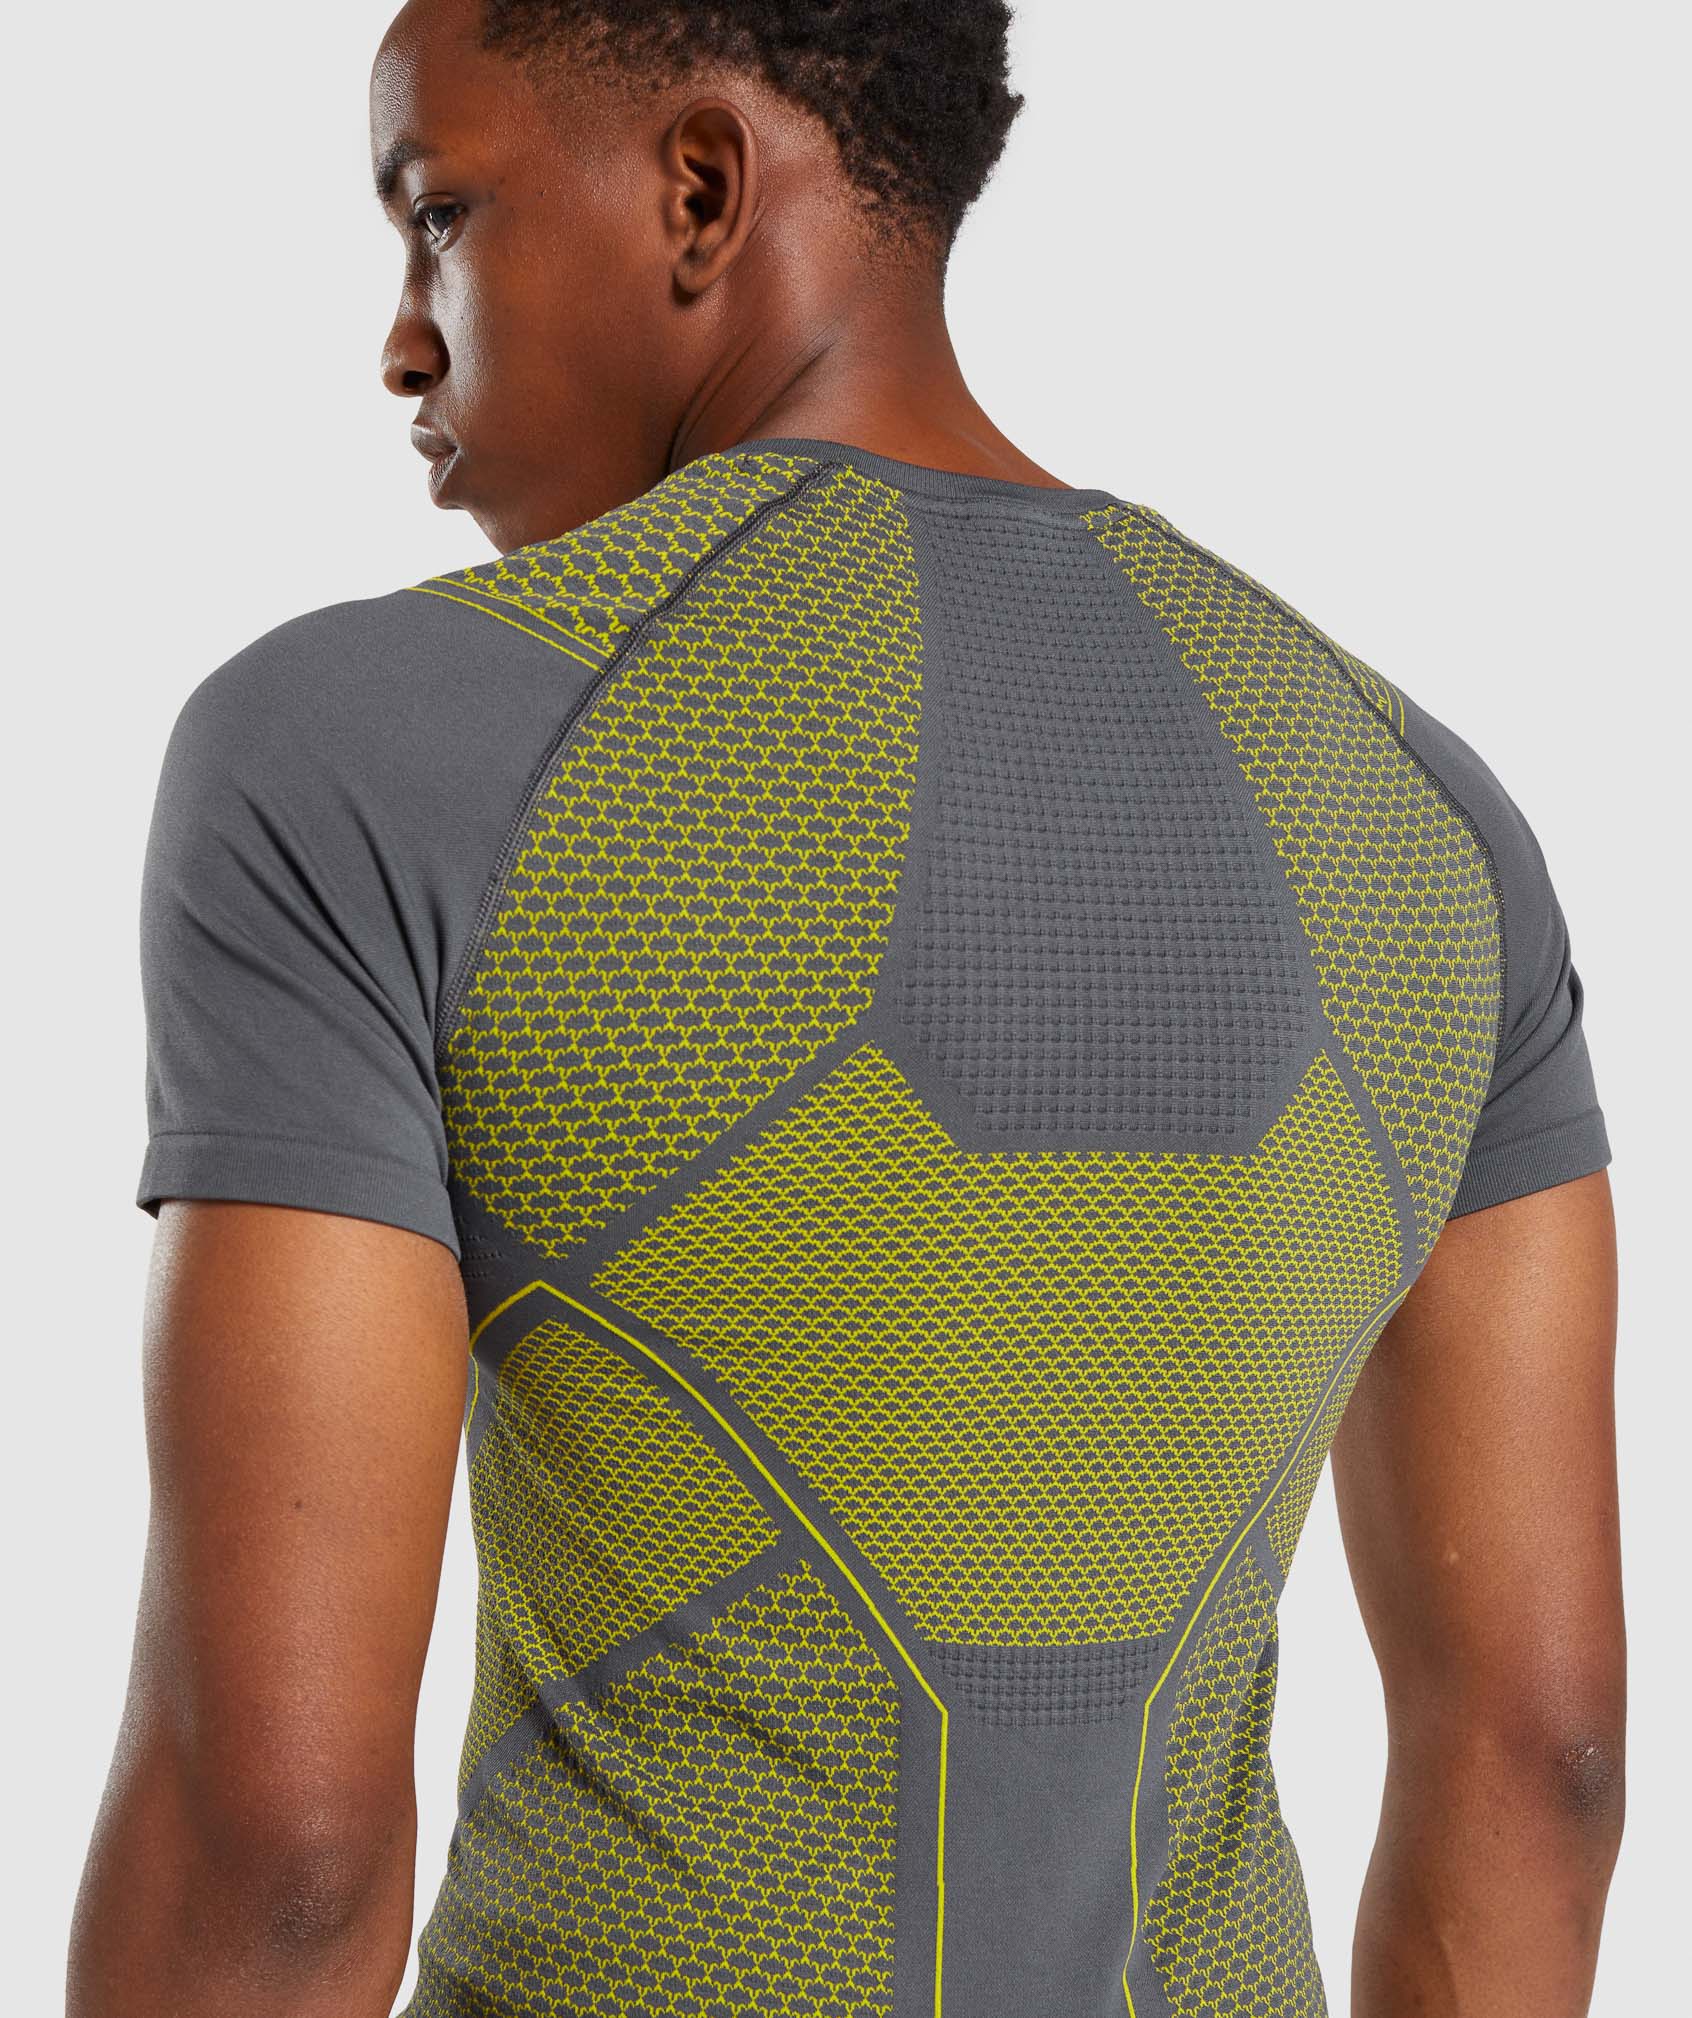 Onyx T-Shirt in Charcoal/Lime - view 7